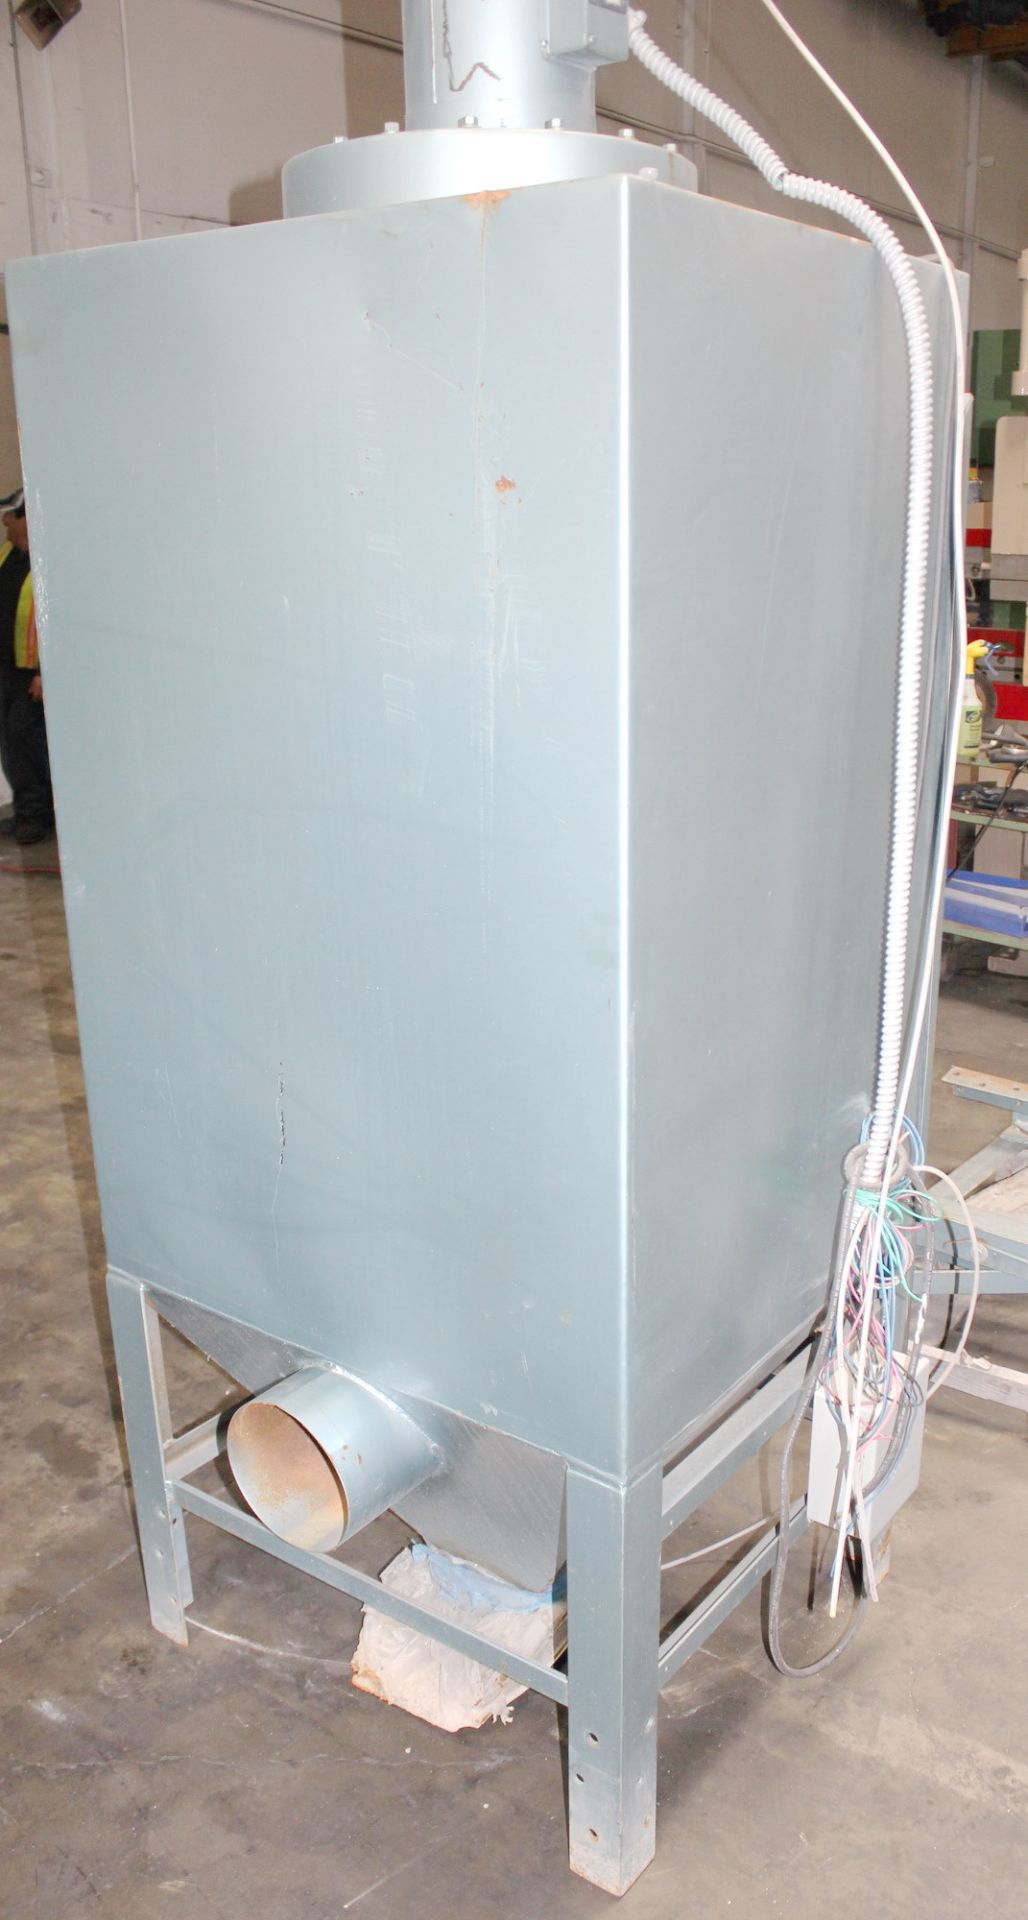 Universal Suction Type Blast Cabinet & Dust Collector | 60" x 48" x 36", Mdl: 60x48x36PDH-DC200, S/ - Image 18 of 20